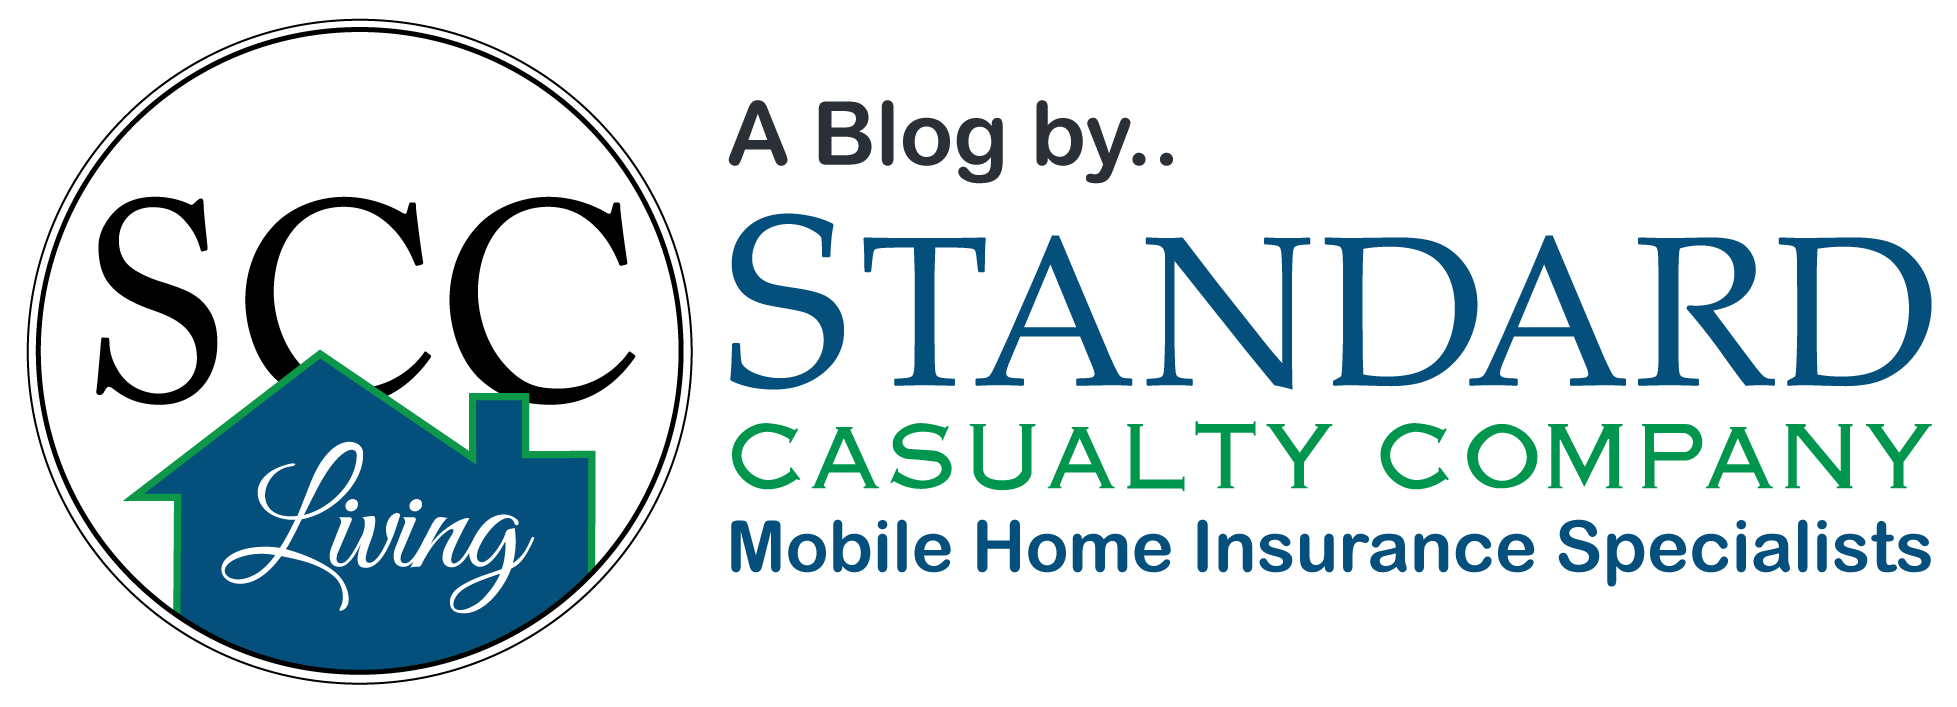 SCC Living. A blog by Standard Casualty Company. Your Mobile Home Specialists.